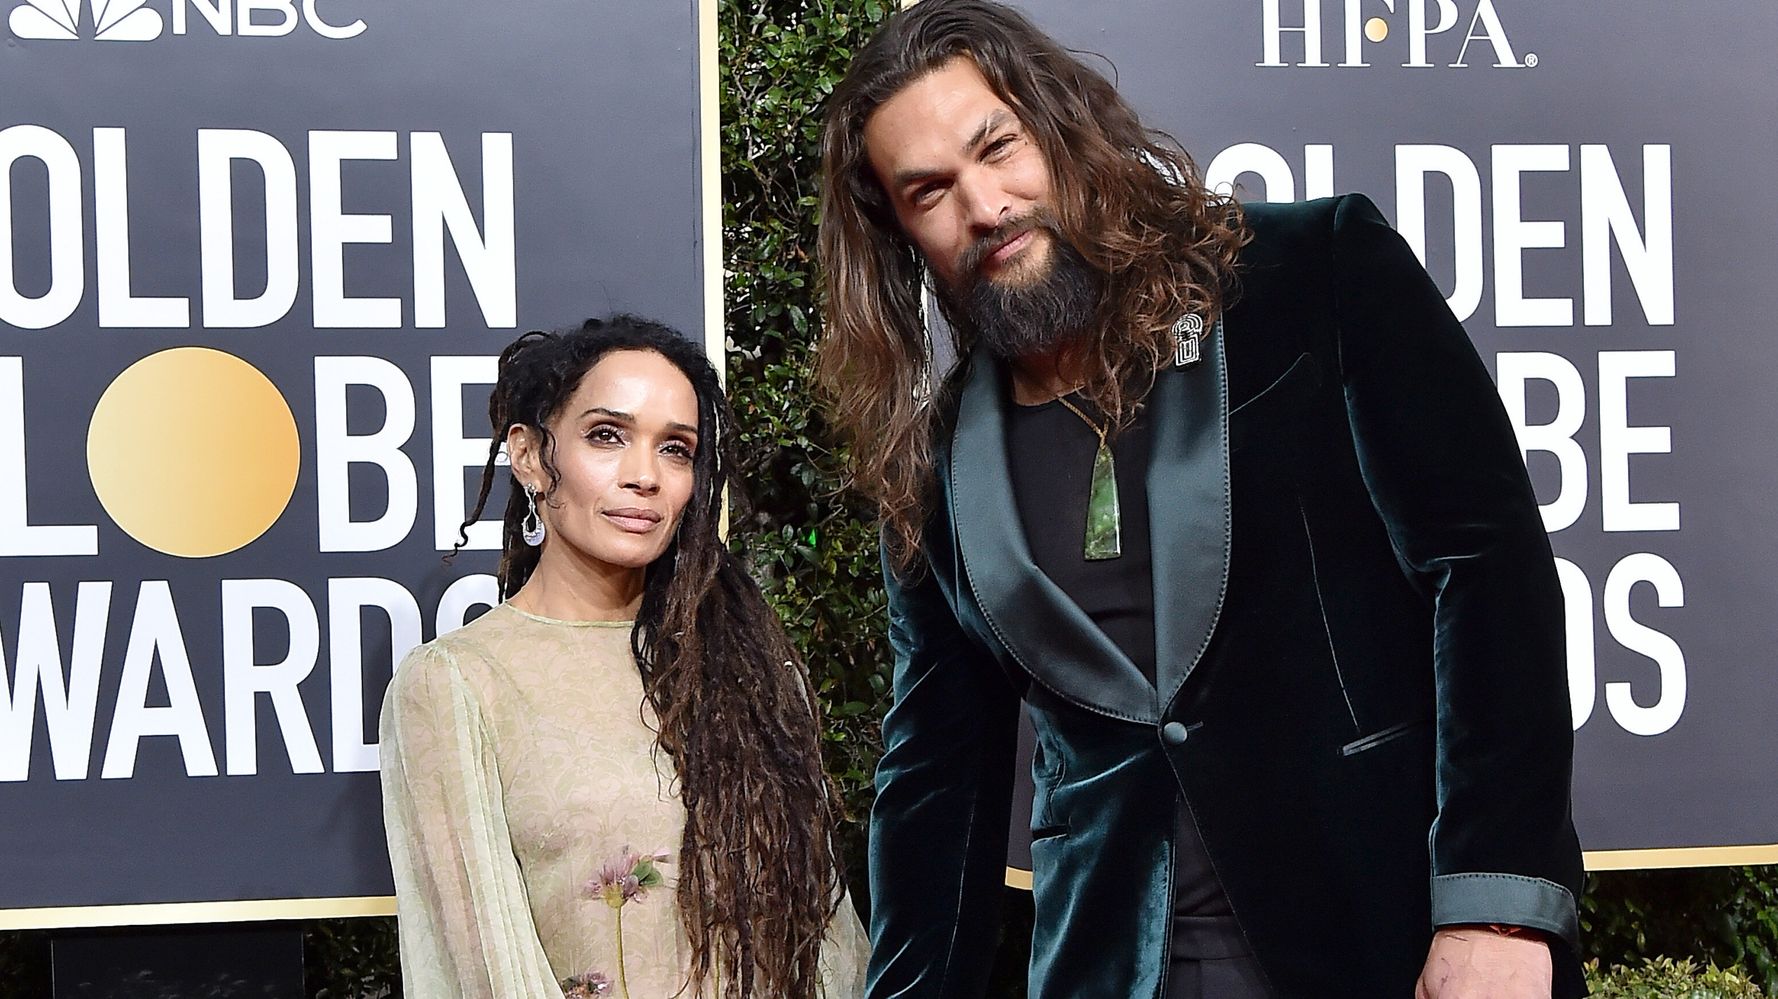 Jason Momoa Says He And Lisa Bonet Were ‘Starving’ After He Died On ‘Game of Thrones’